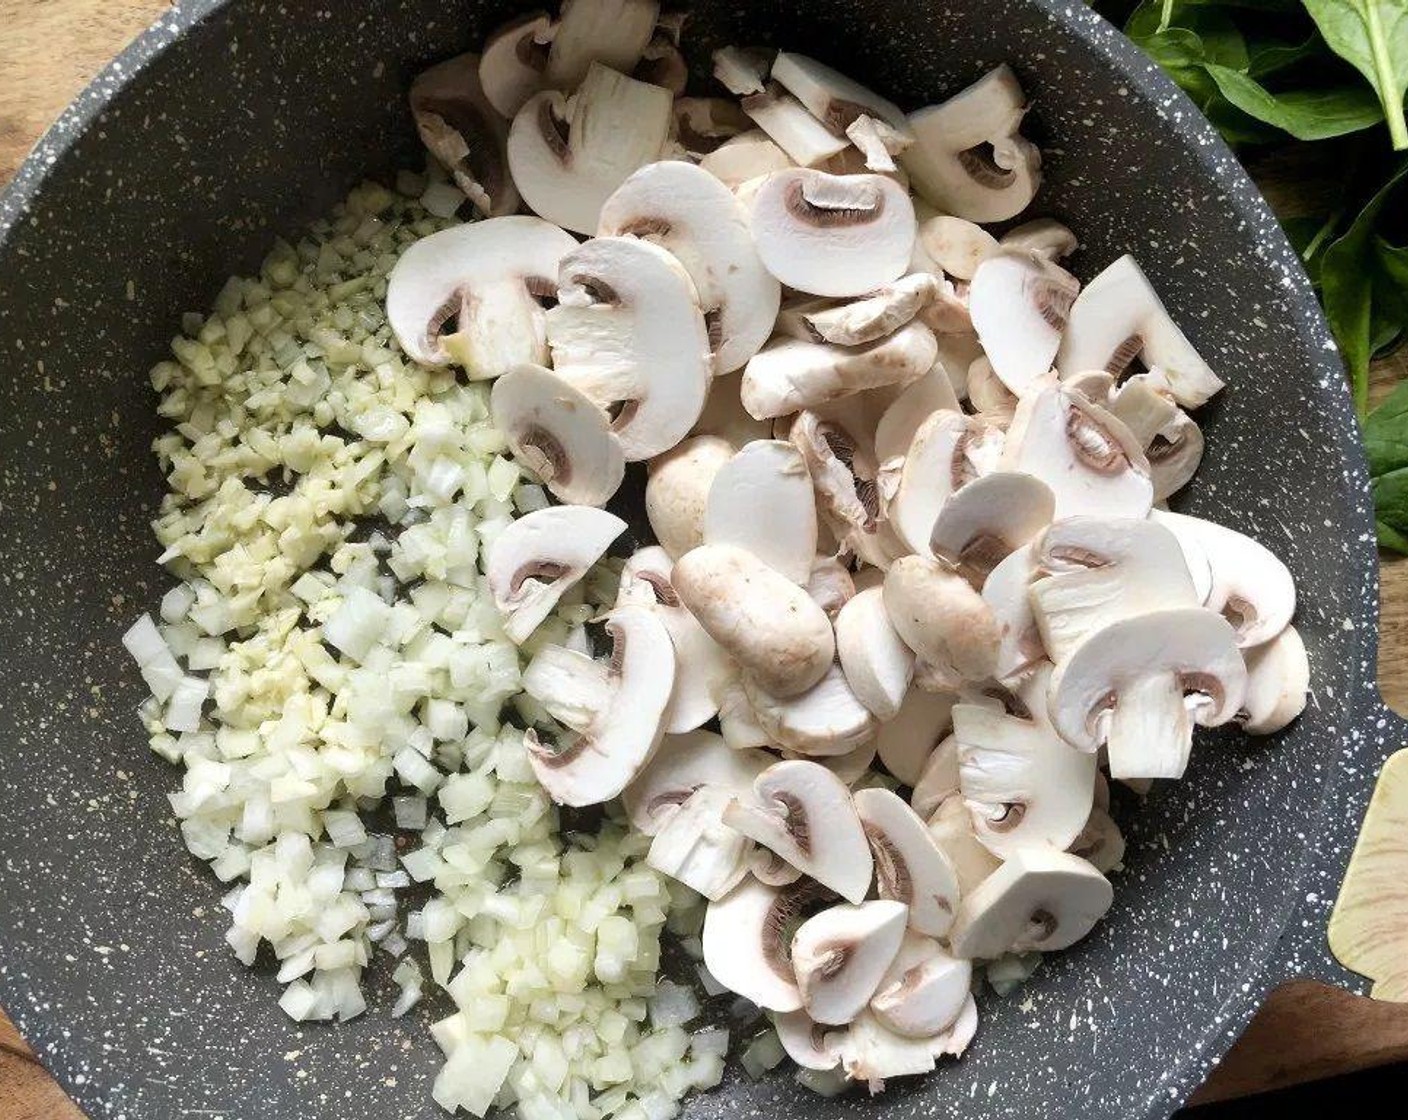 step 4 Heat Olive Oil (1 Tbsp) in a large nonstick skillet over medium-high heat. Add Onion (1/2 cup), Button Mushrooms (2 1/4 cups), and Garlic (3 cloves); sauté three to four minutes until onion and mushrooms are tender. Add Fresh Baby Spinach (5 2/3 cups), cooking until it is wilted.